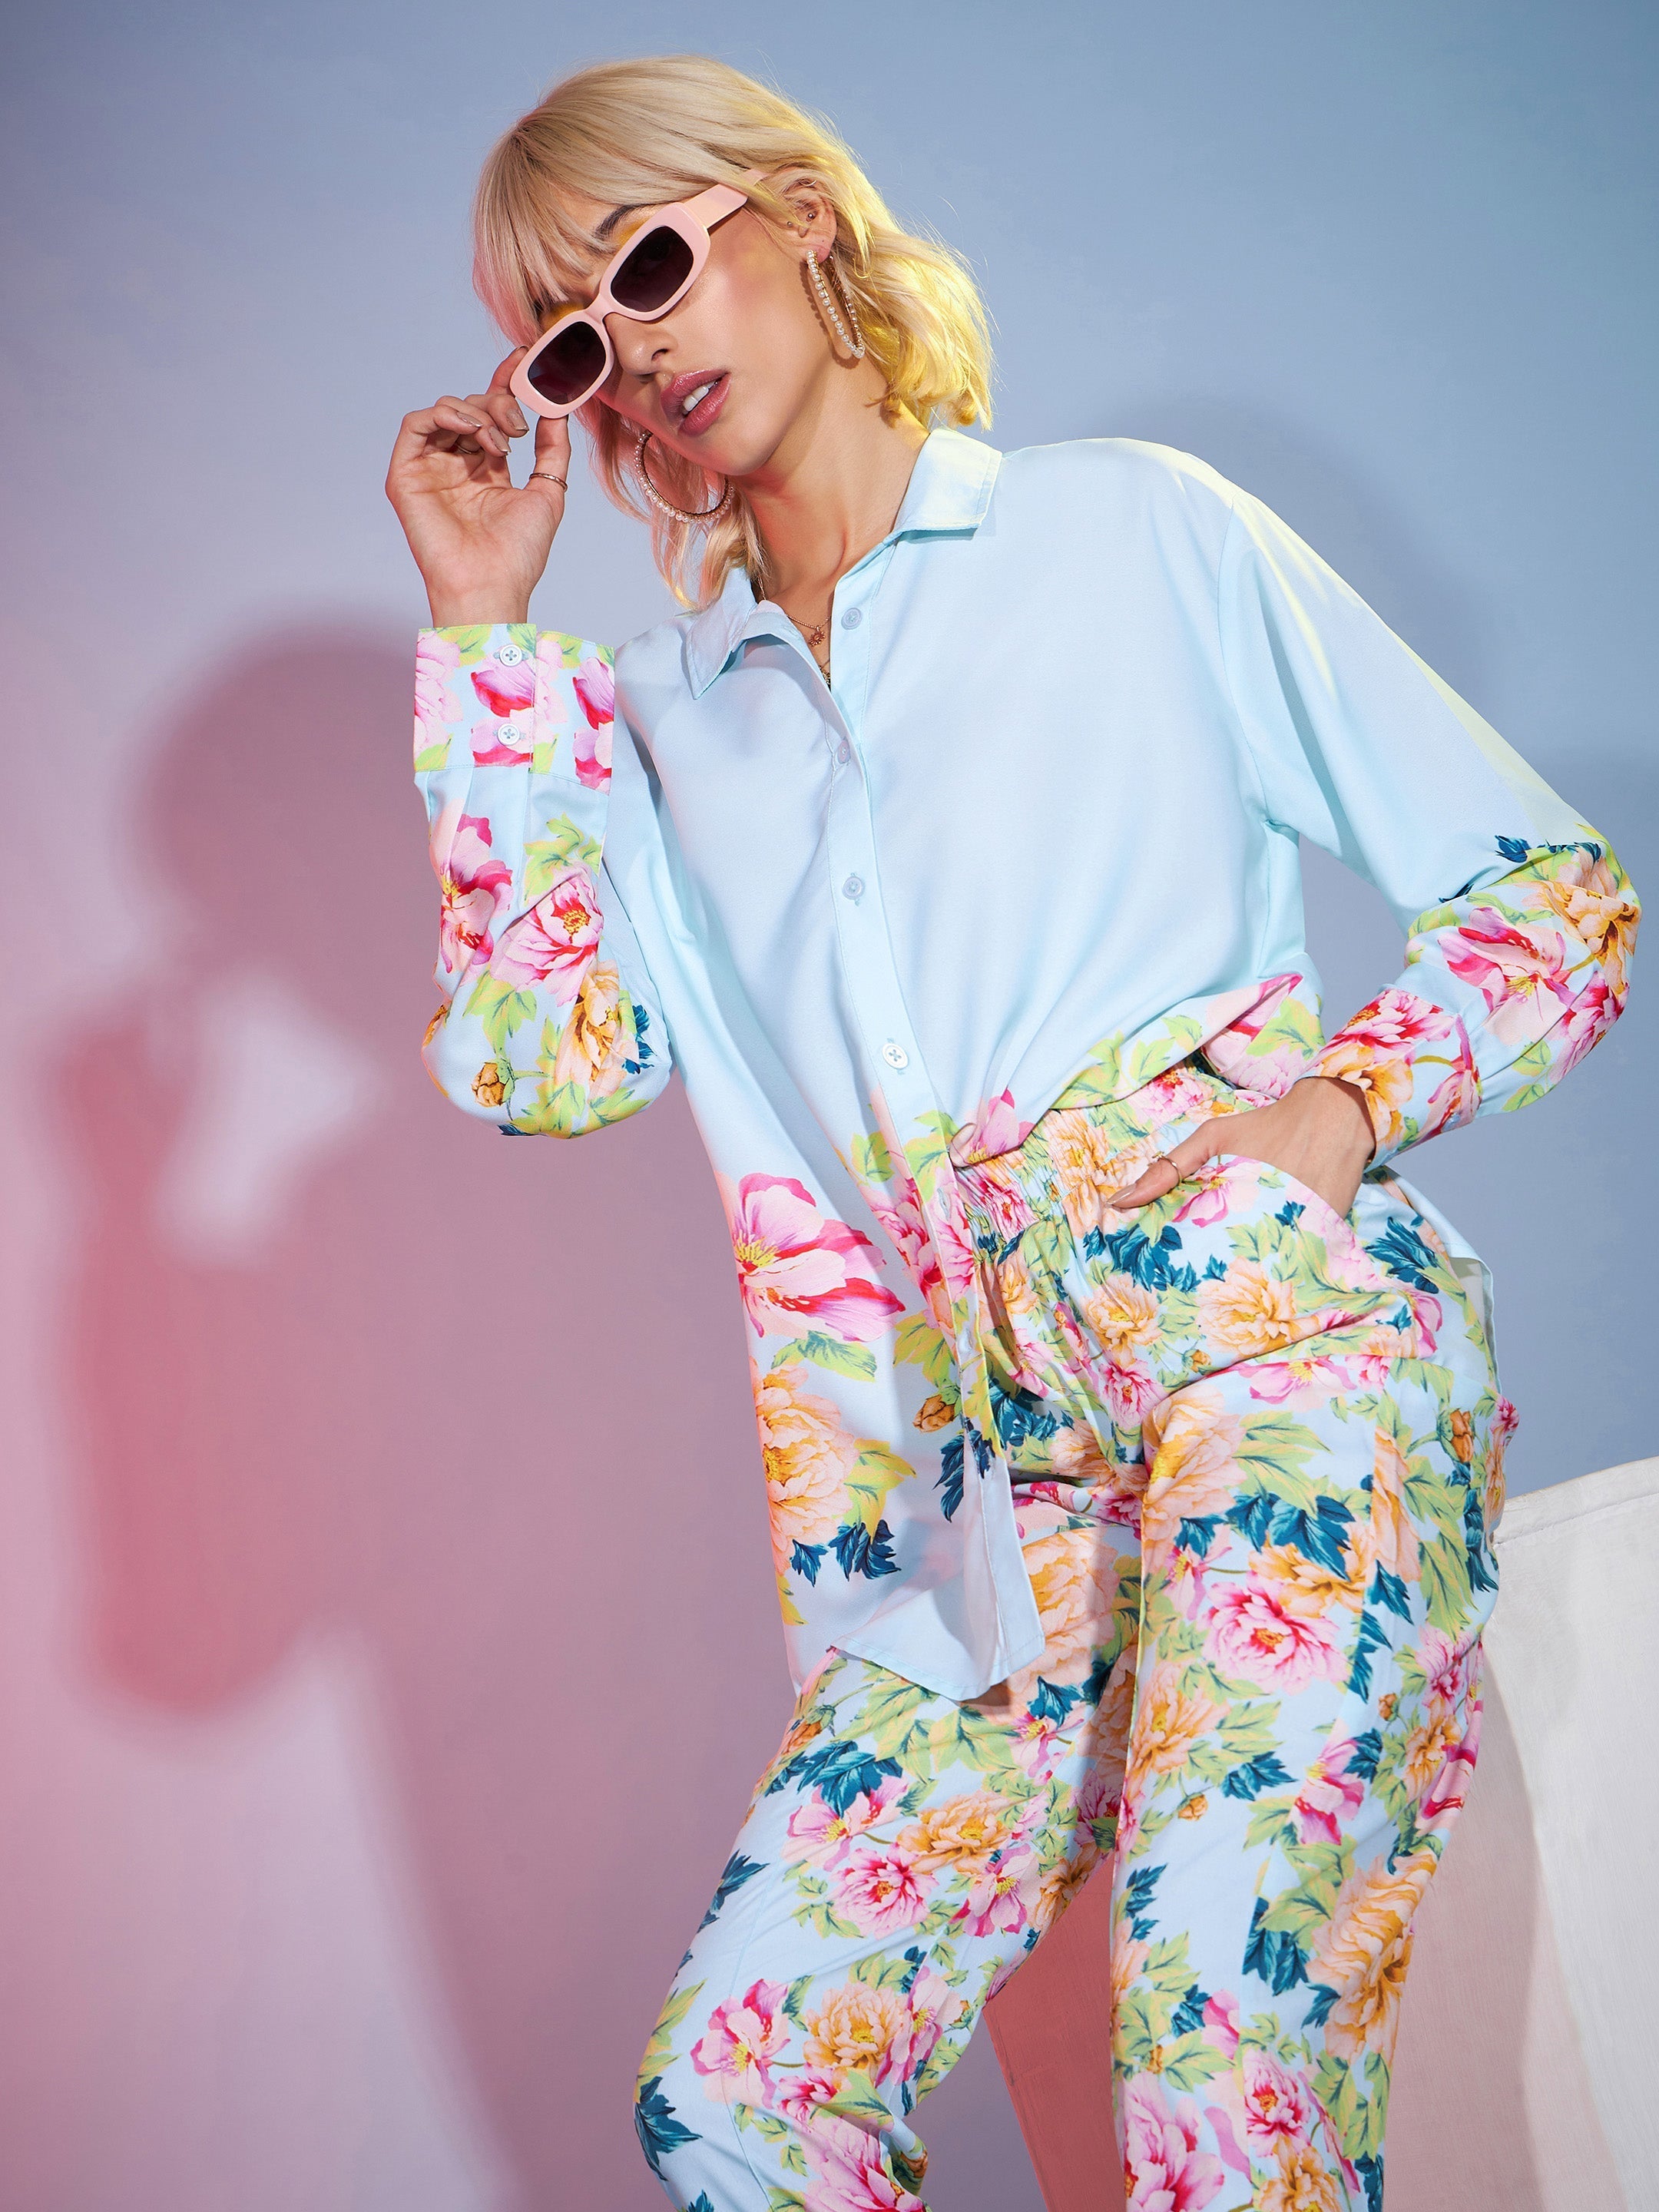 Women's Turquoise Floral Oversized Shirt With Tapered Pants - SASSAFRAS